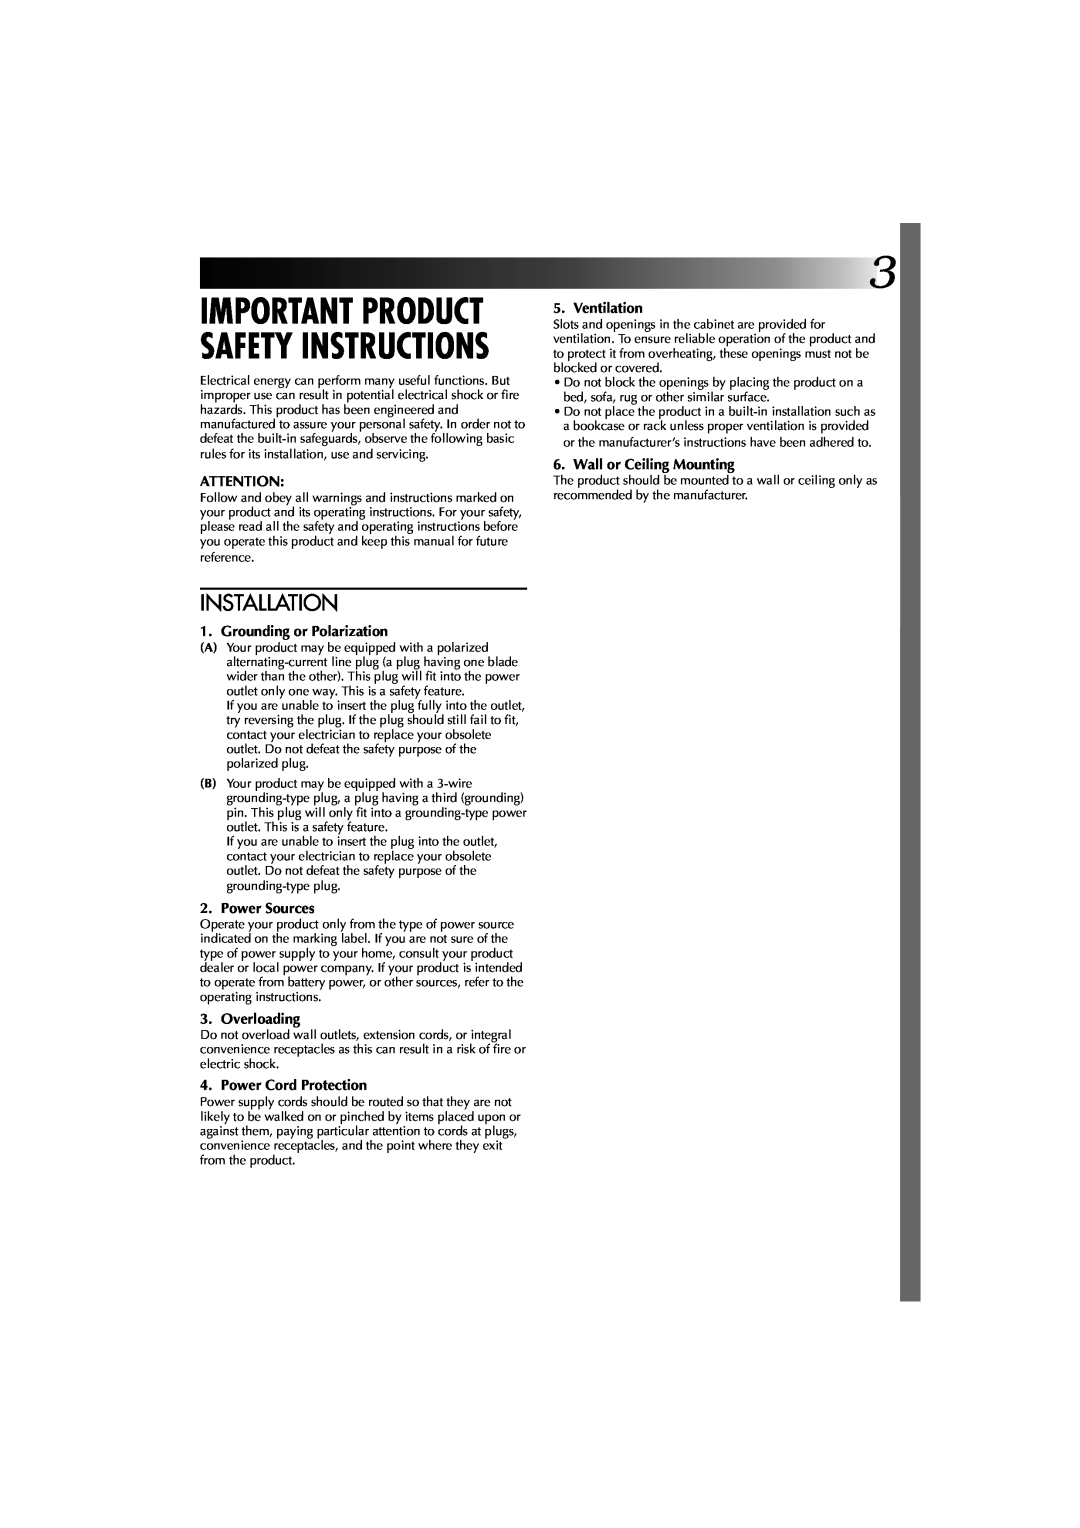 JVC GV-PT1 manual Installation, Important Product Safety Instructions 